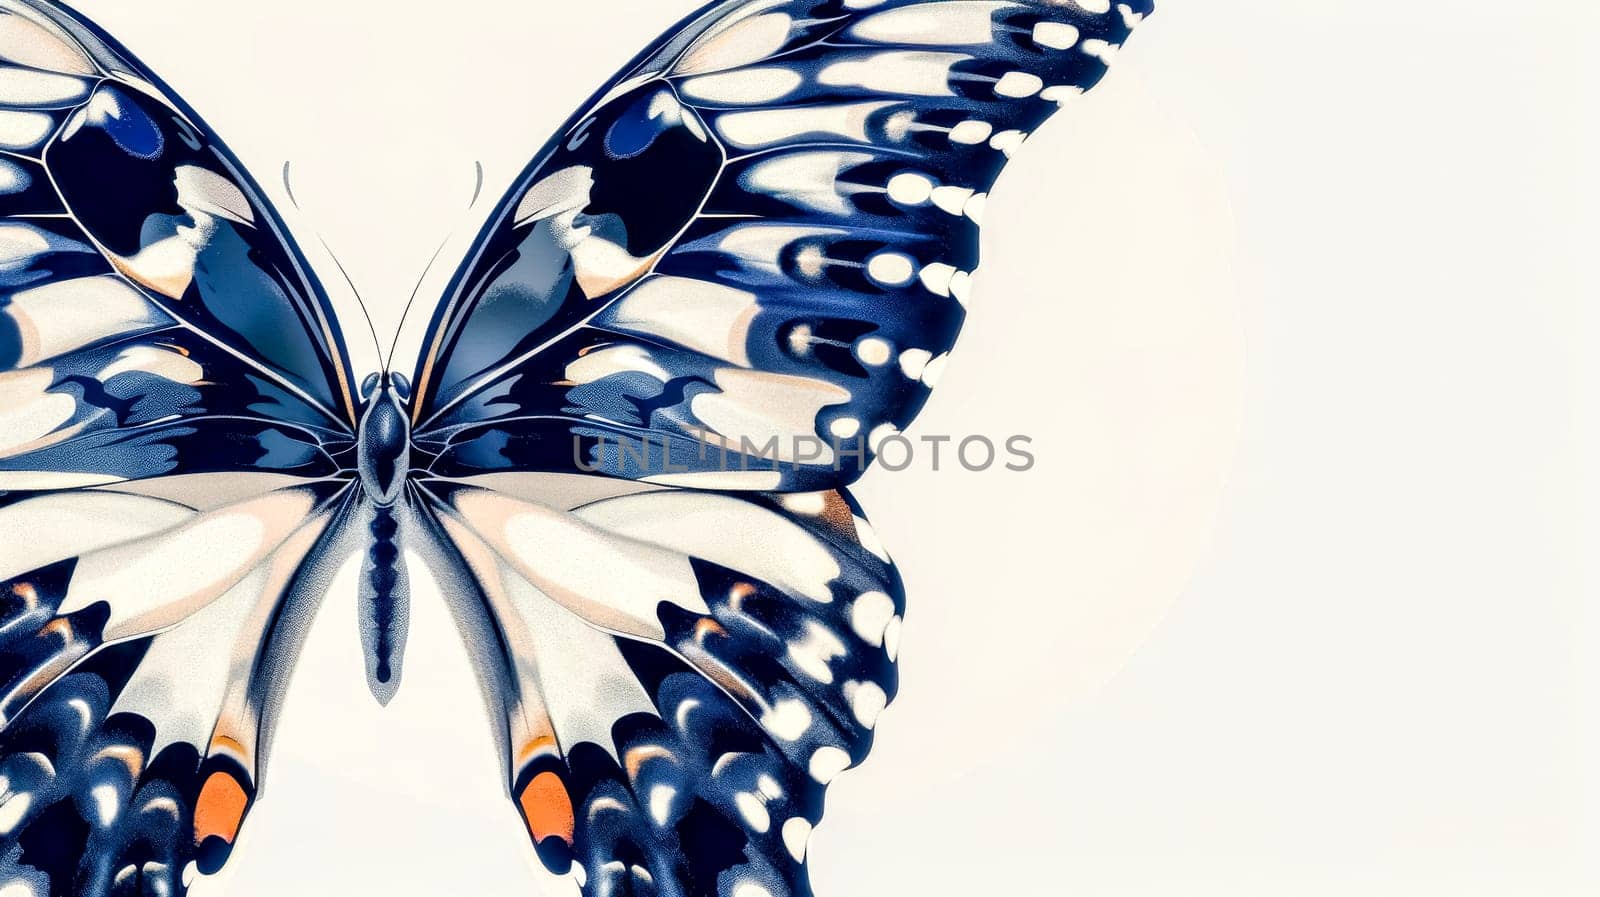 Artistic rendering of a vibrant blue butterfly with orange accents, isolated on a white backdrop